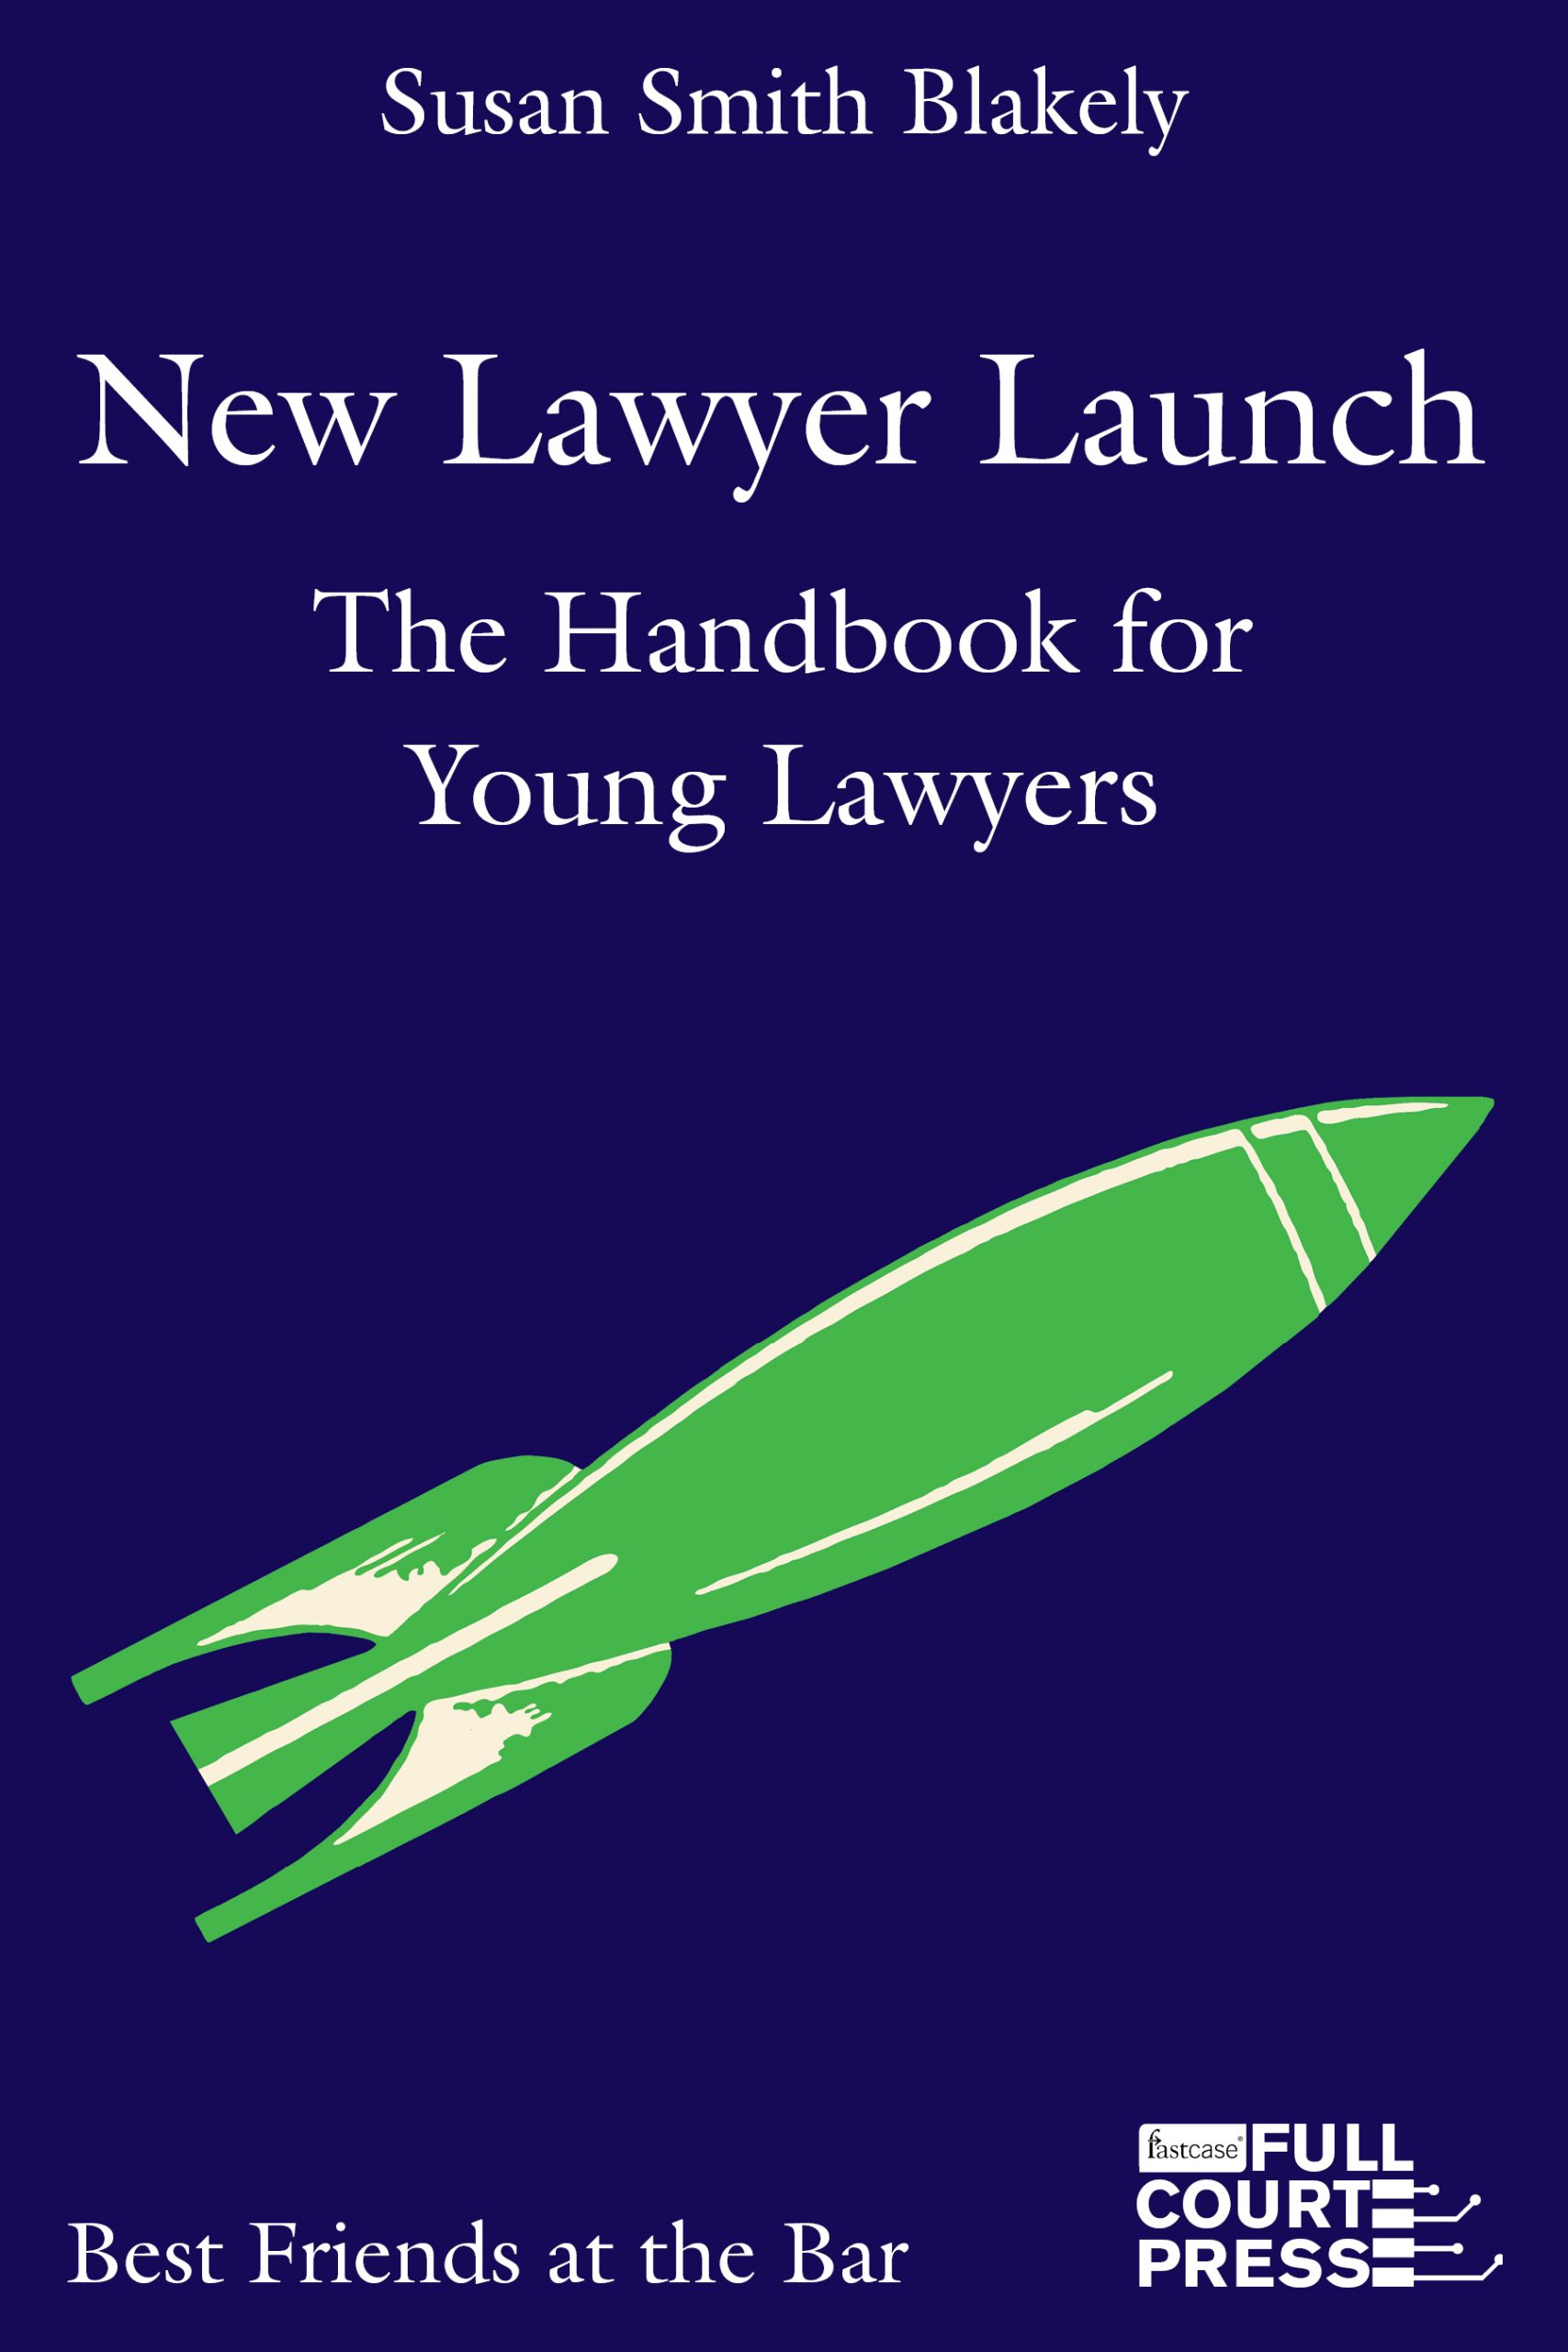 New Lawyer Launch: The Handbook for Young Lawyers